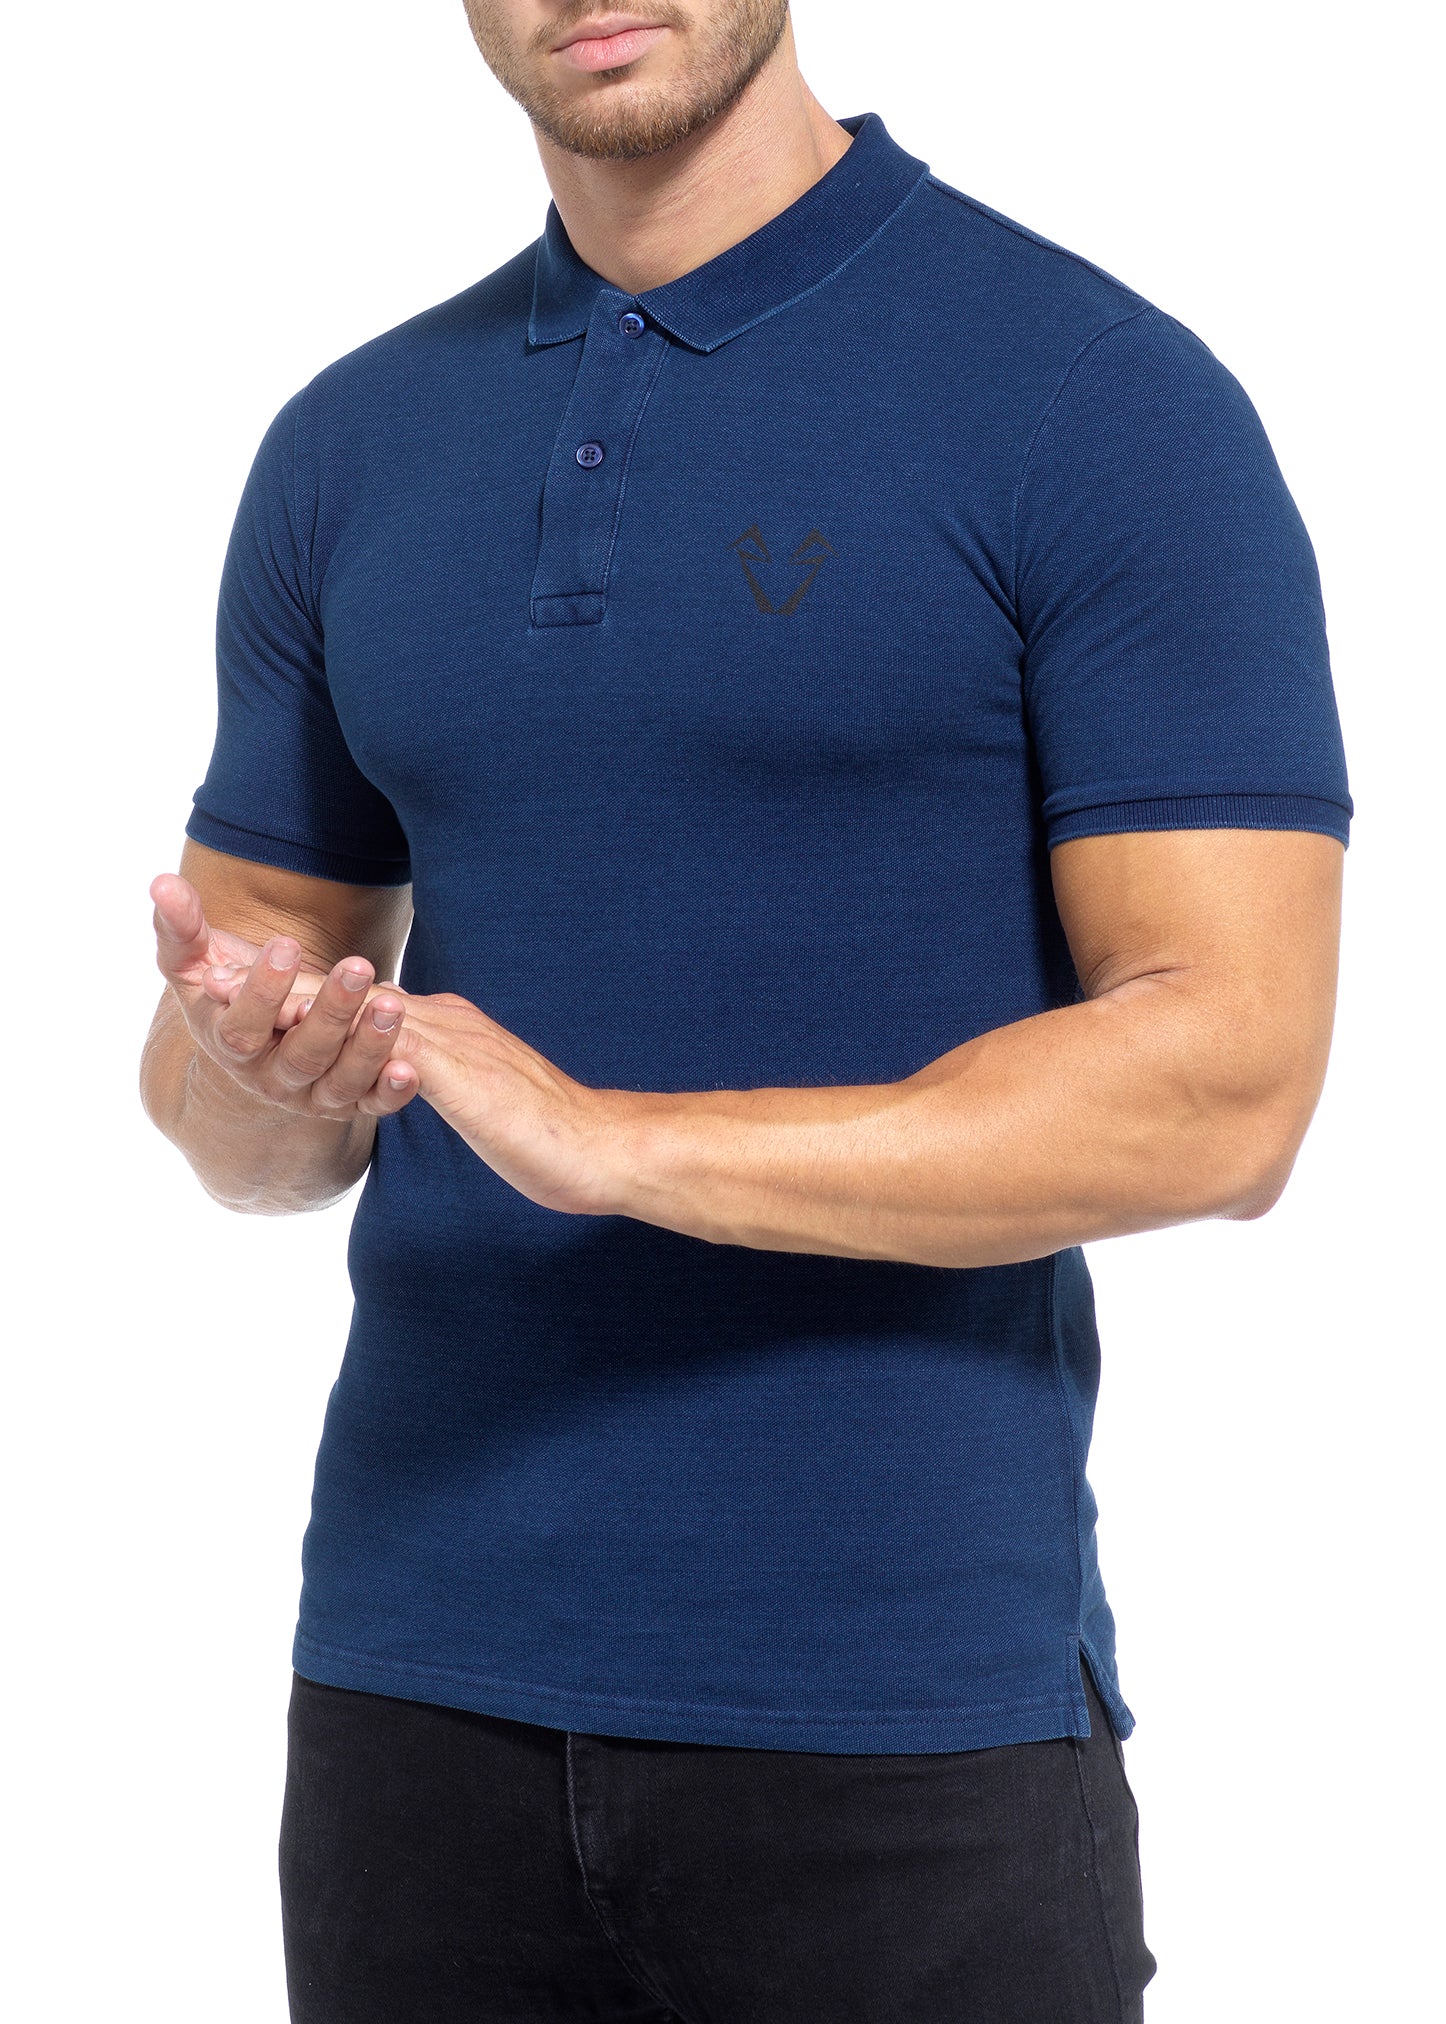 Mens Muscle Fit Polo Shirts